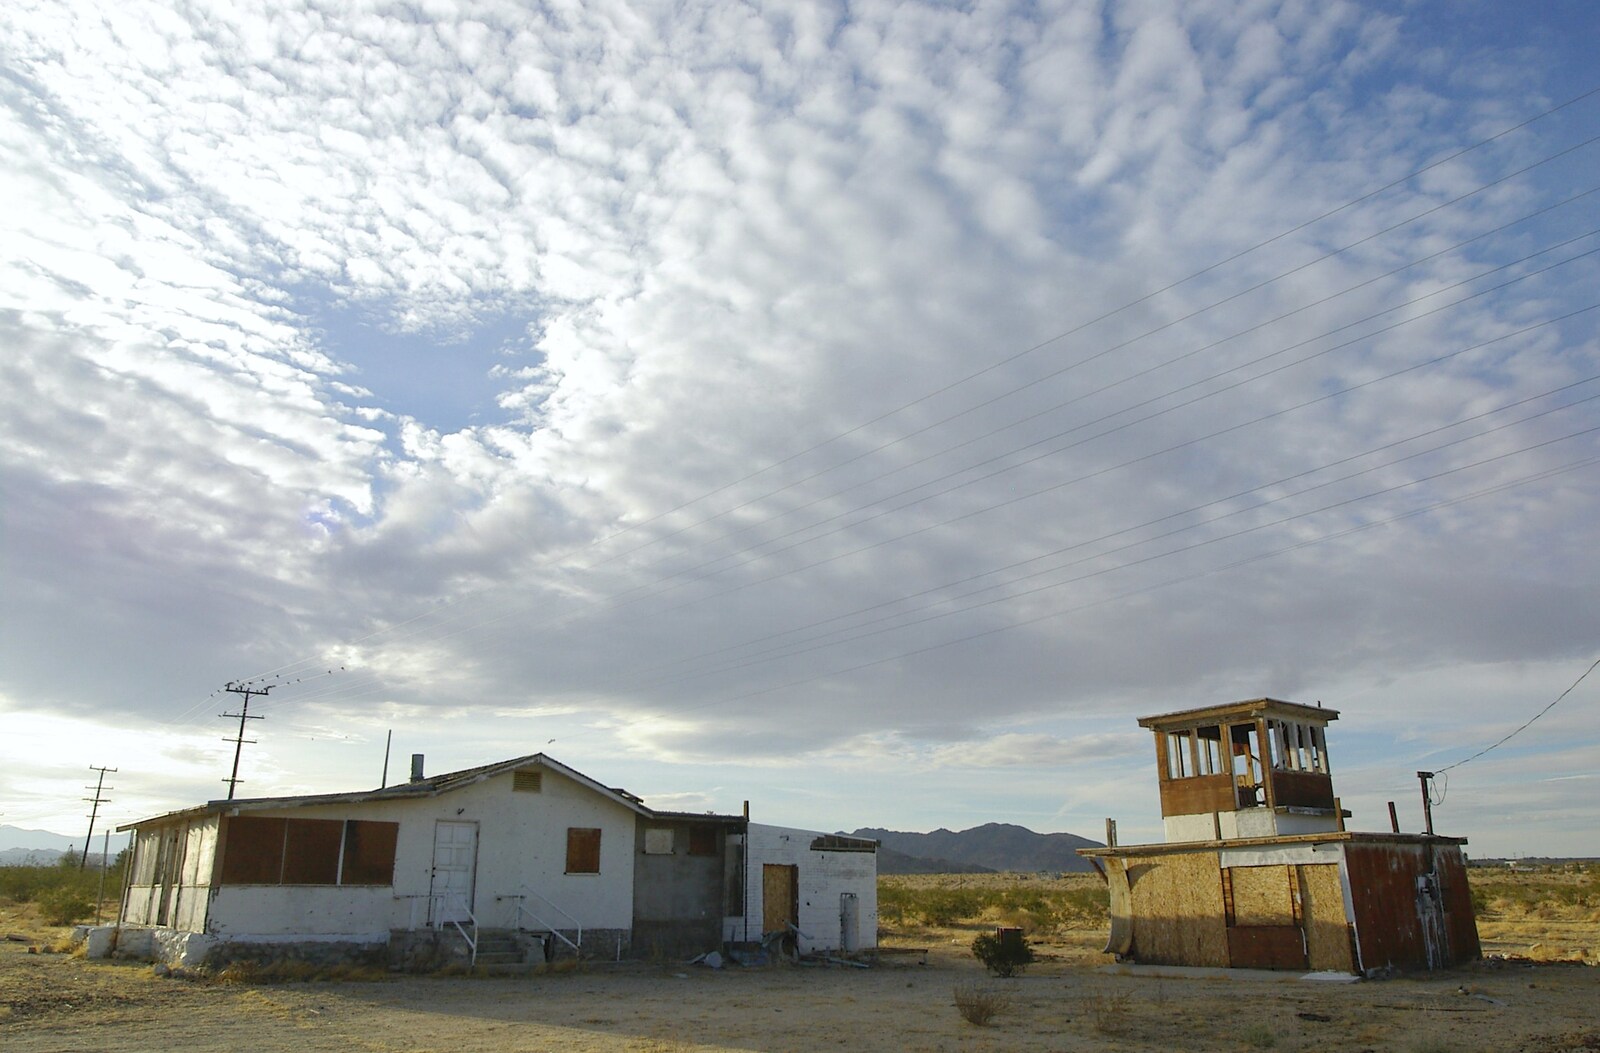 The home-made airport from Mojave Desert: San Diego to Joshua Tree and Twentynine Palms, California, US - 5th March 2006